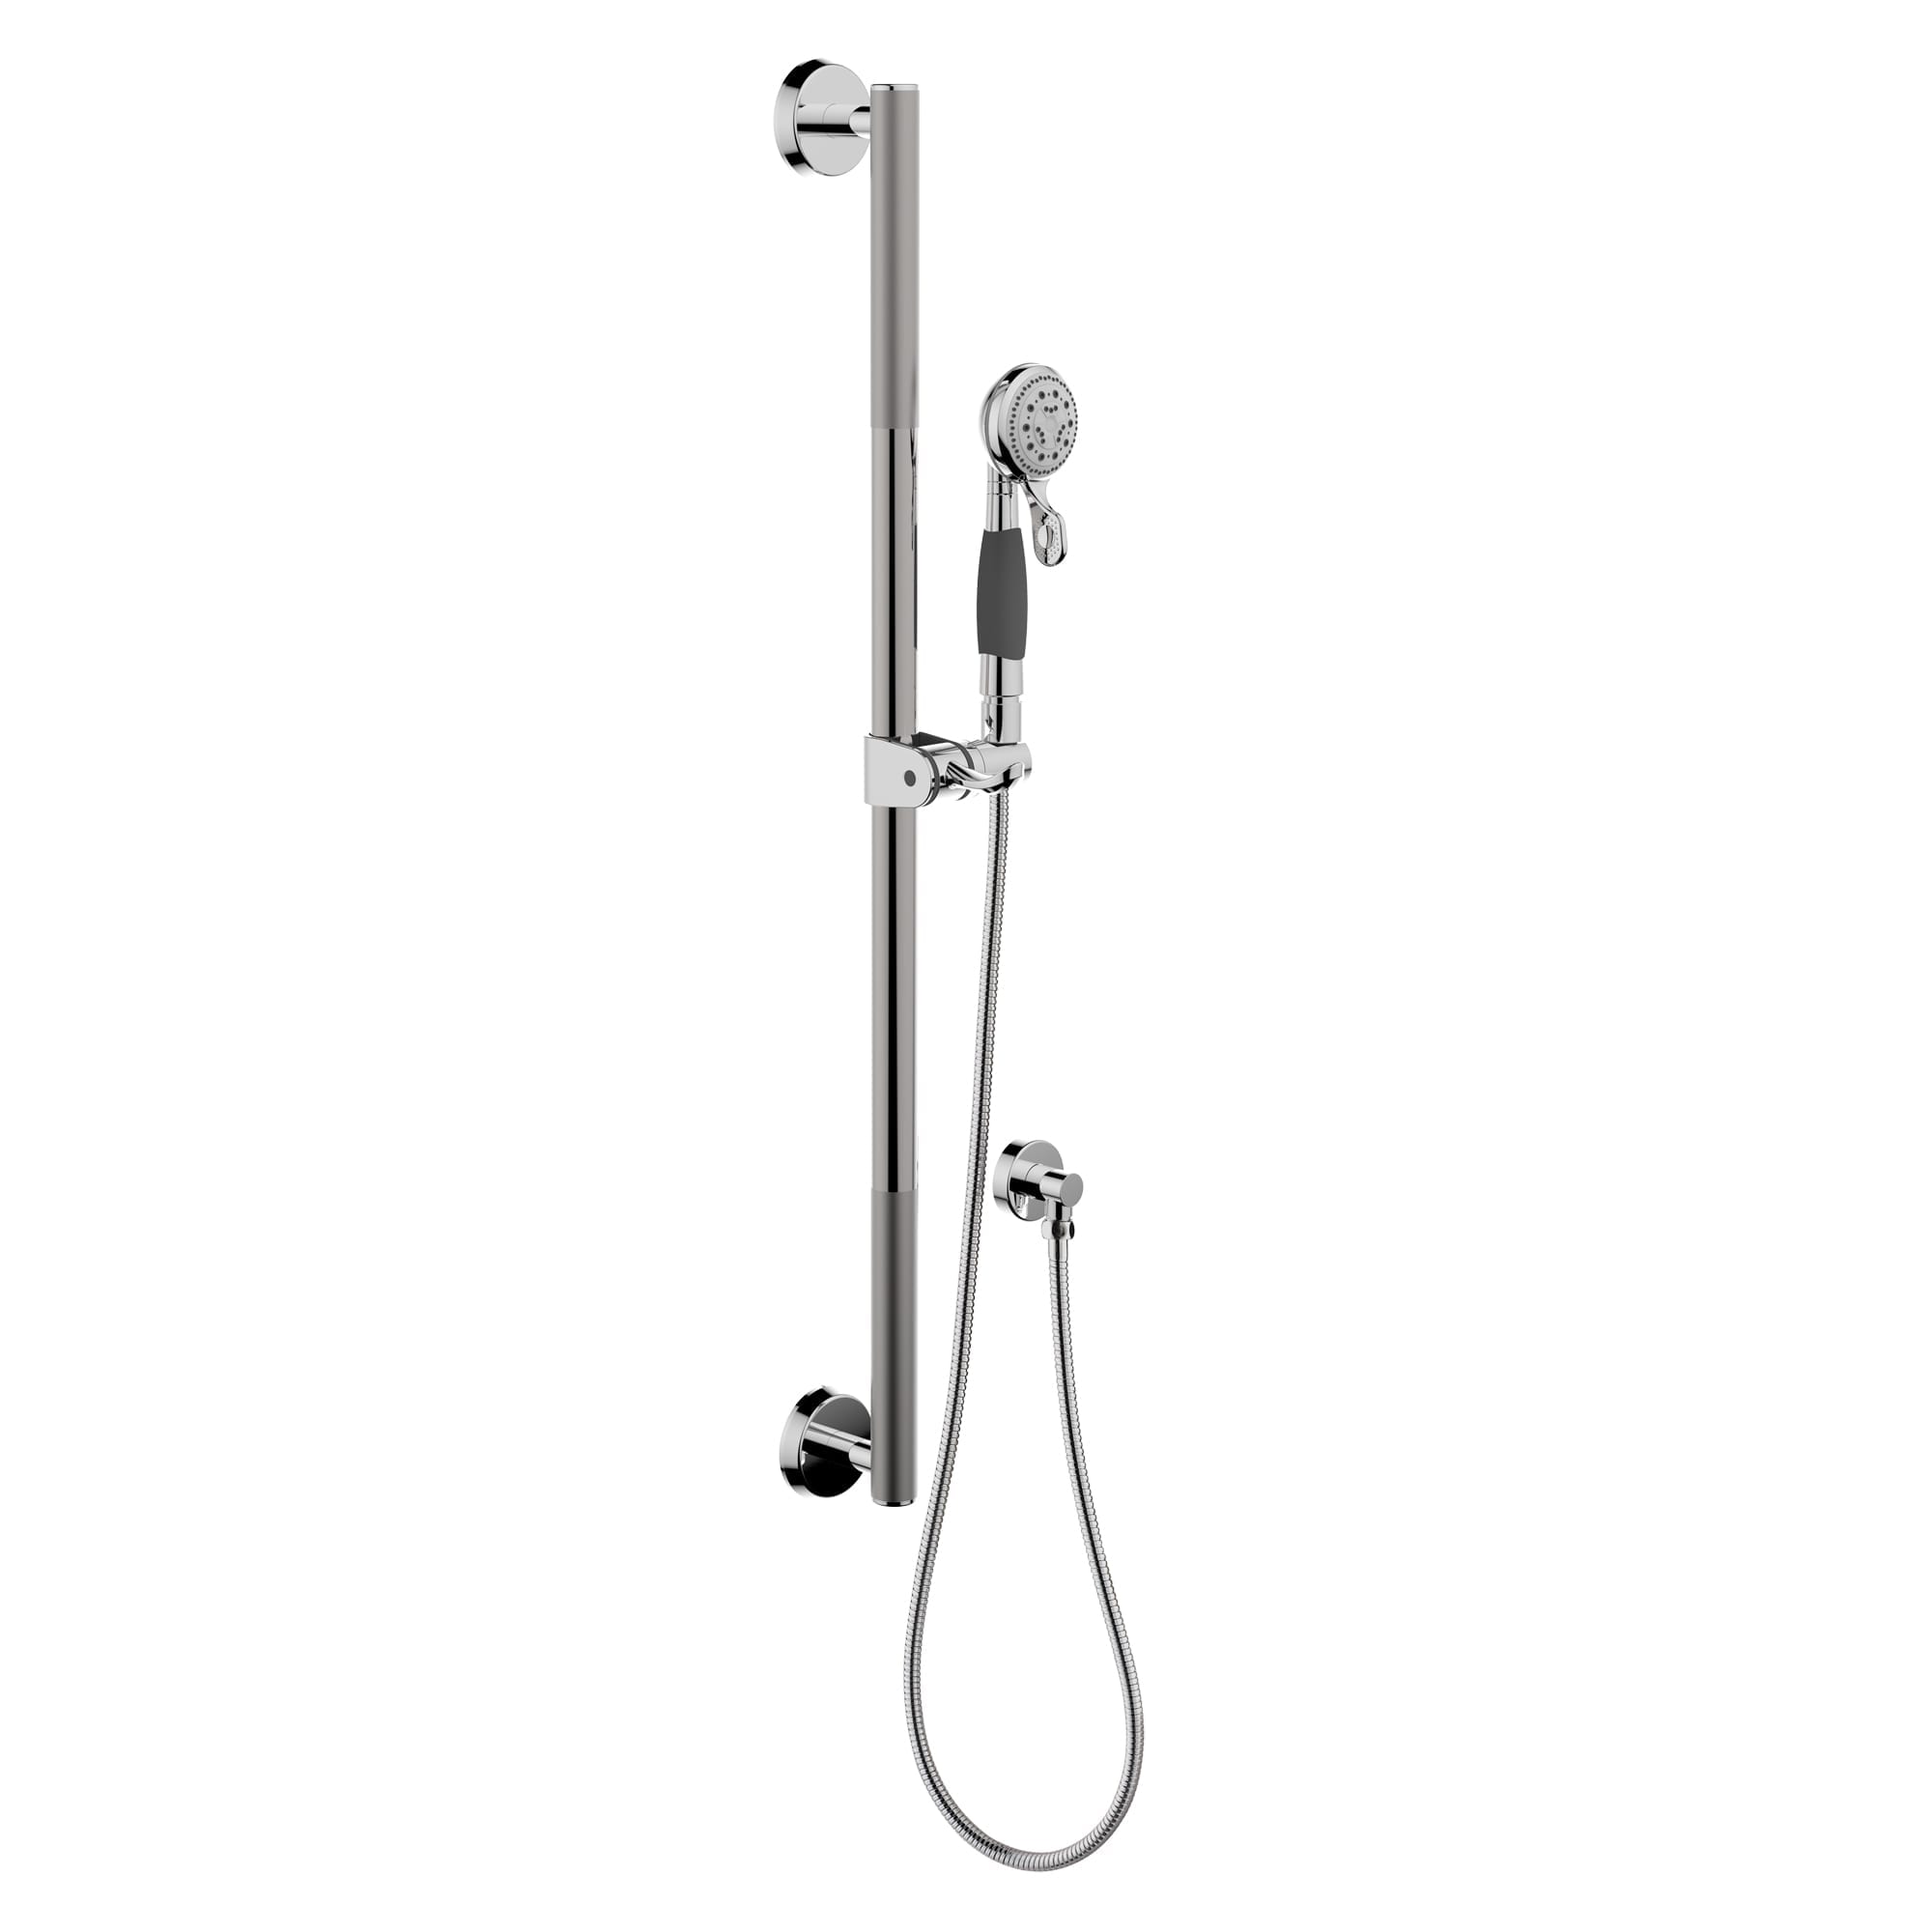 Bélanger B90-631- Ada Grab / Sliding Bar (Round), Multi-Function Hand Shower Kit With Water Supply Elbow And Flexible Hose